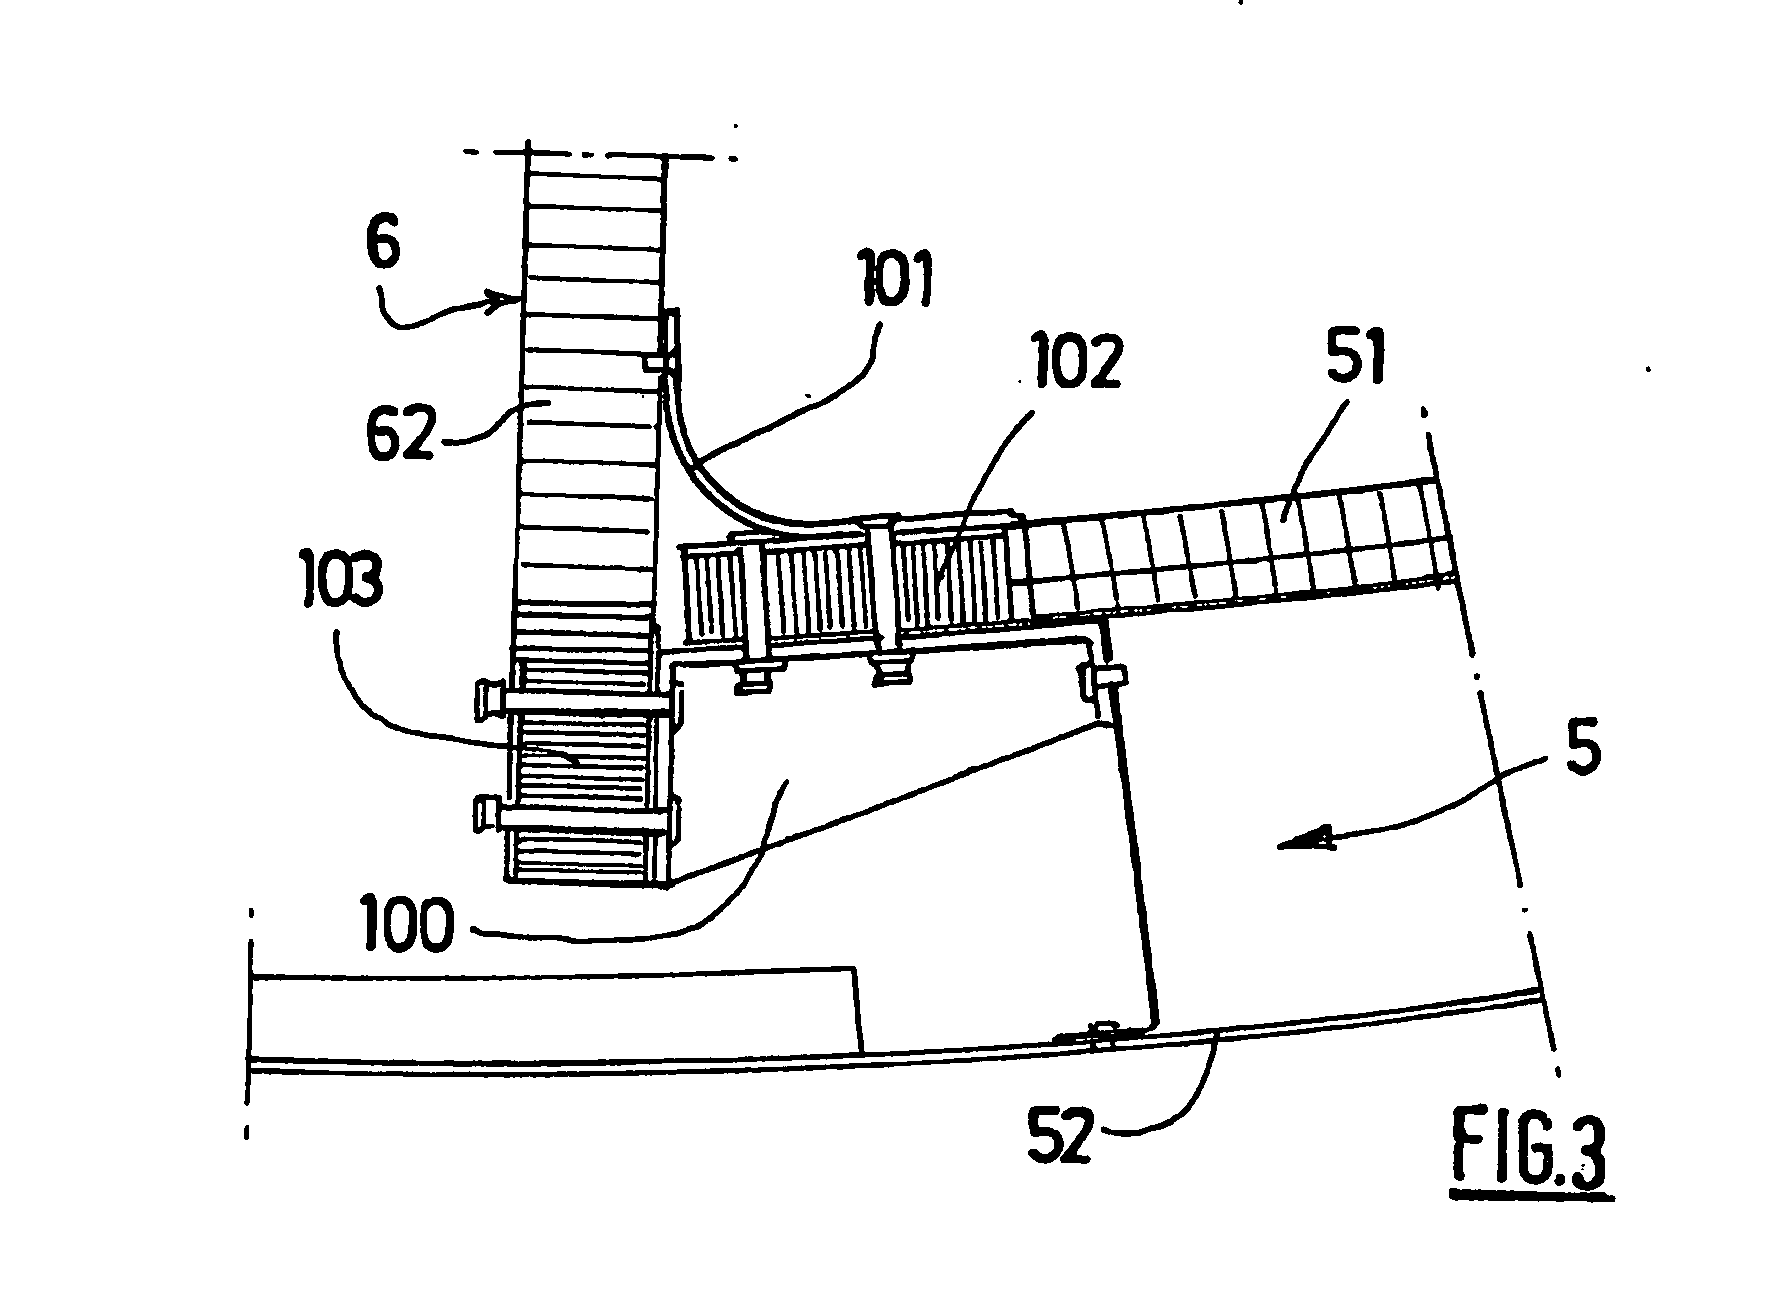 Coupling system connecting an internal structure and an external stucture of a jet engine nacelle